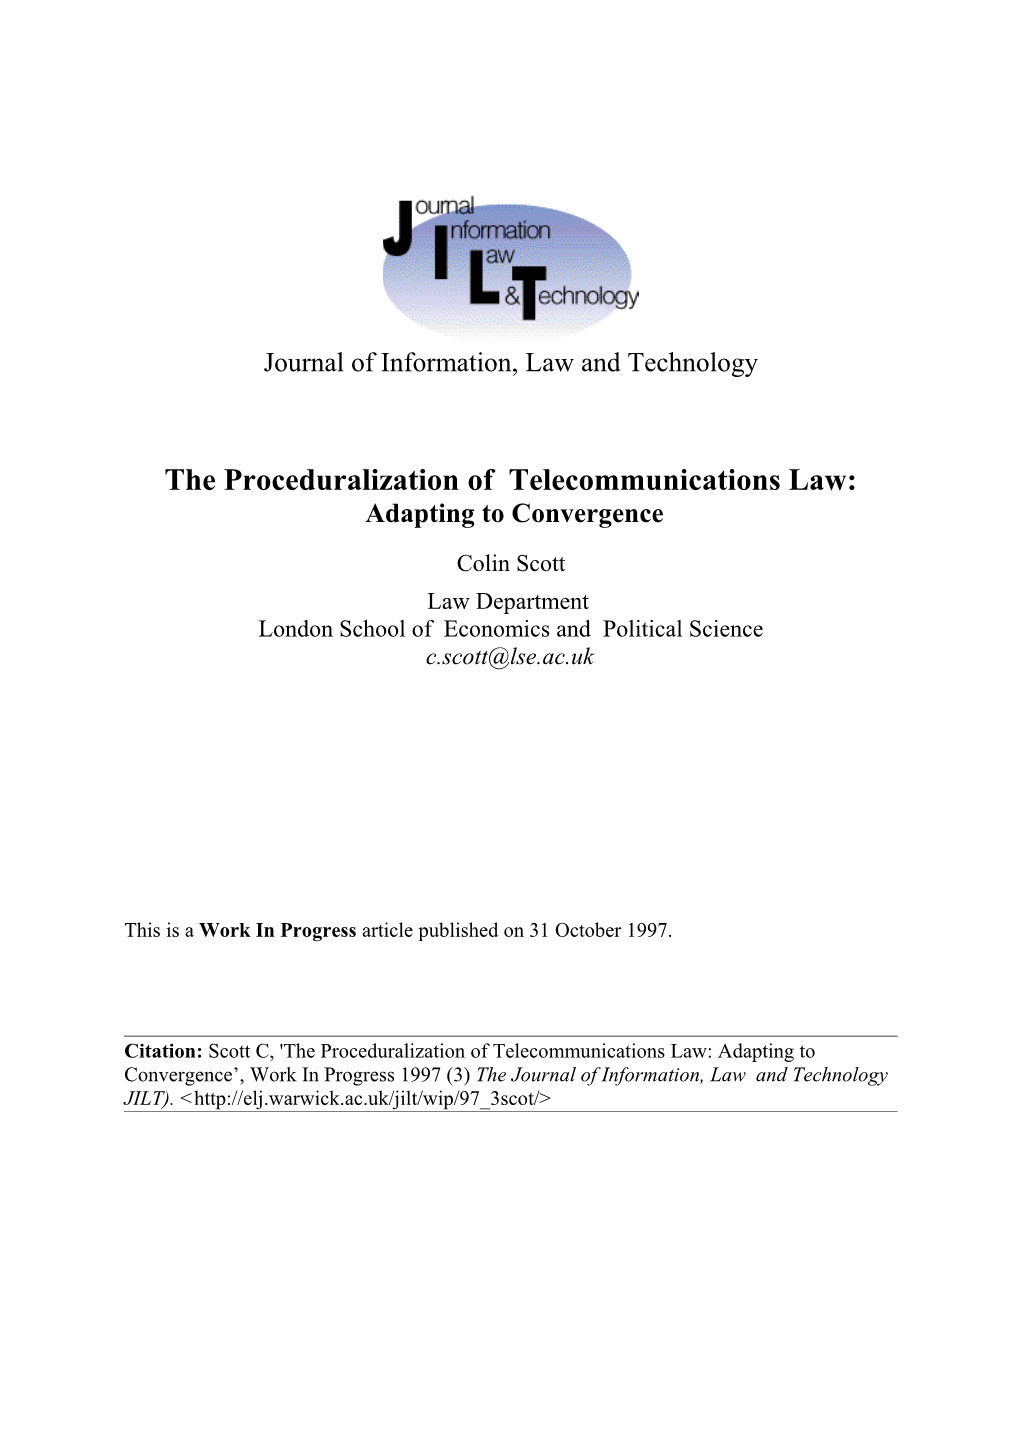 Work in Progress - Paper for Presentation at the Conference the Proceduralization of Law